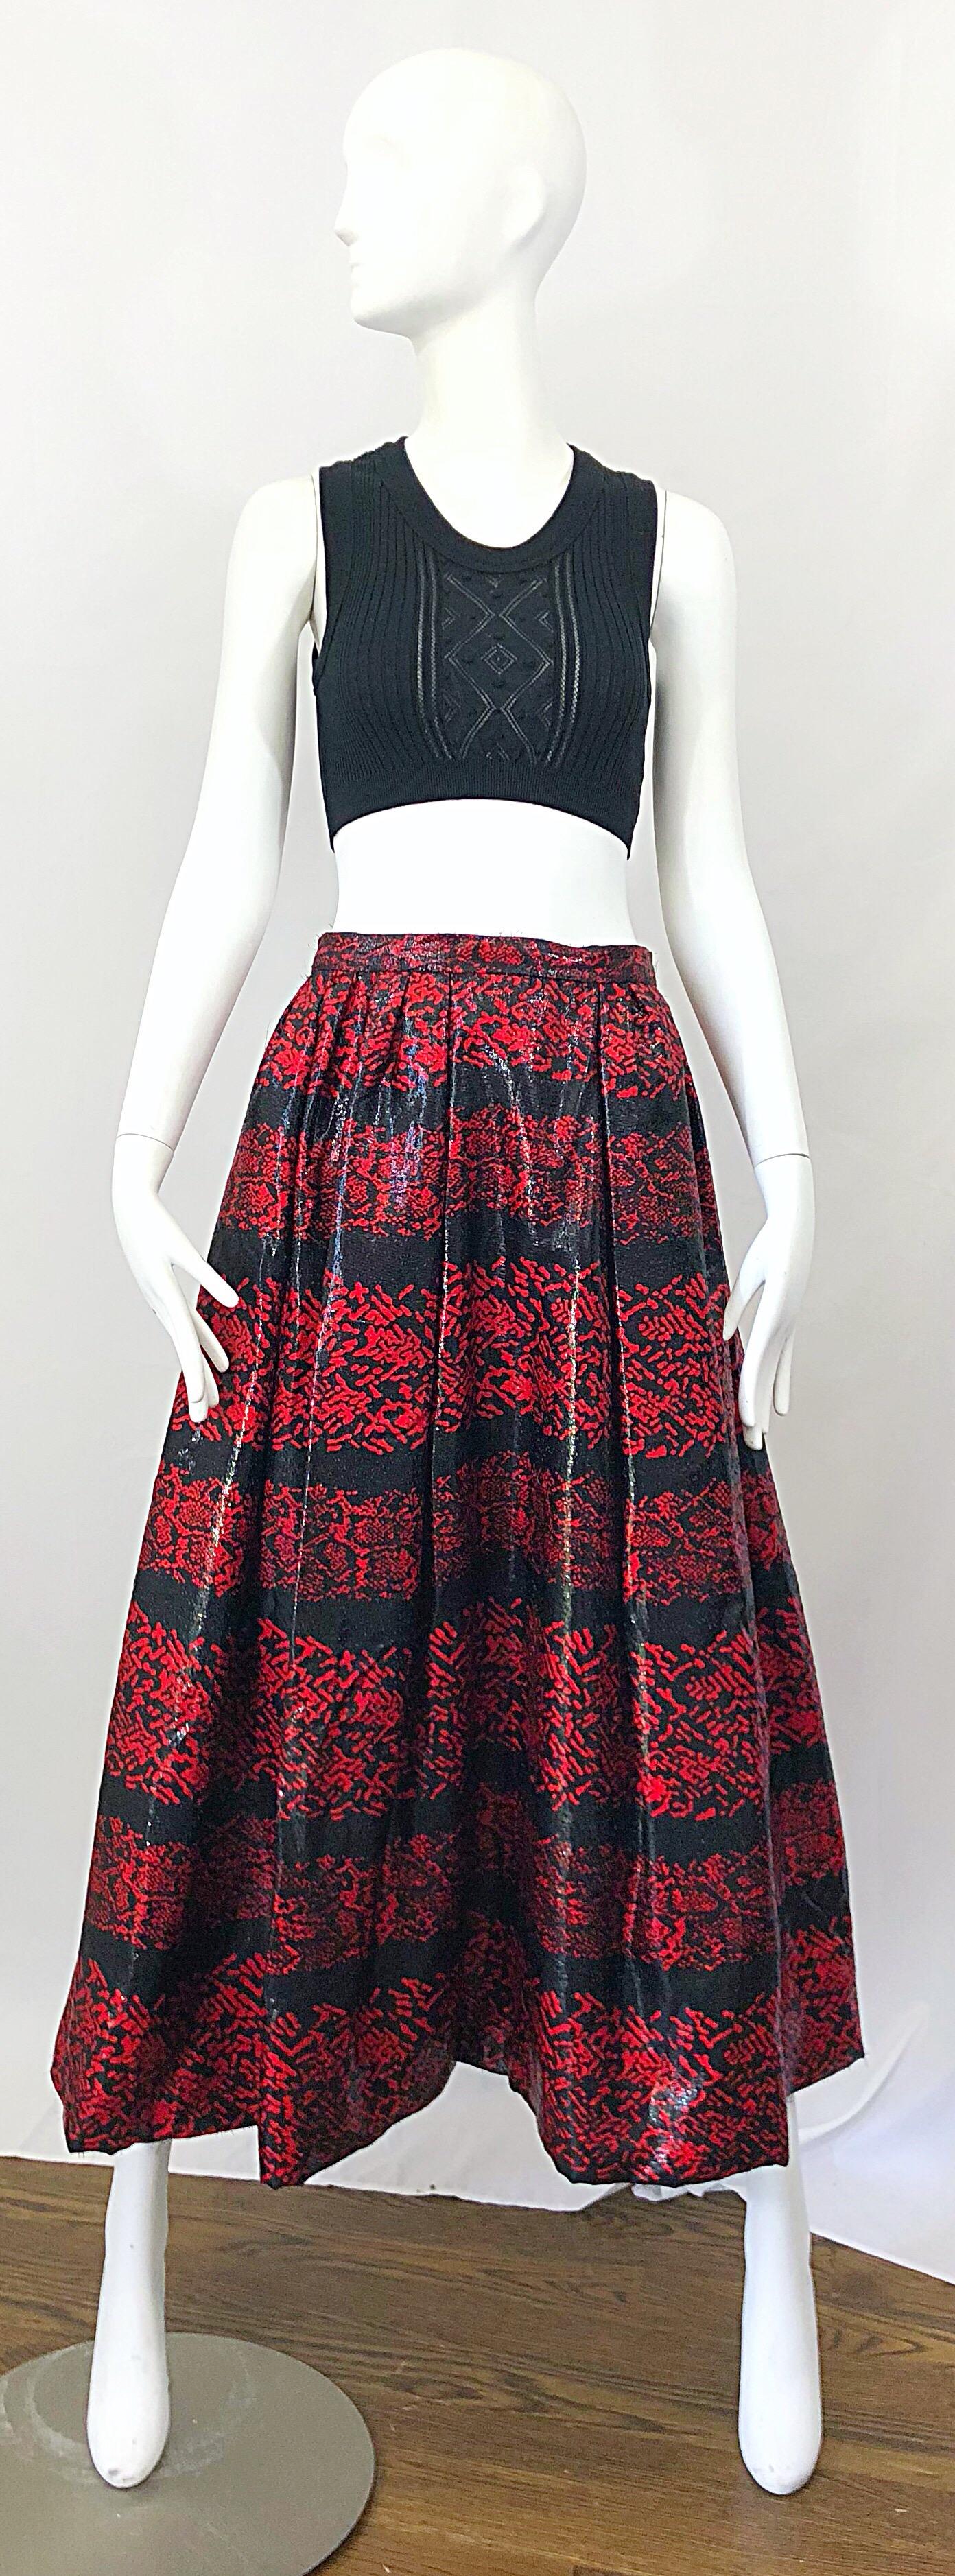 Rare and so chic TARQUIN EBKER Couture red and black metallic threaded silk pleated midi skirt! Not quite a maxi skirt, this beauty hits above the ankle. The fabric is so luxurious that it literally looks like liquid. Full skirt features a horsehair